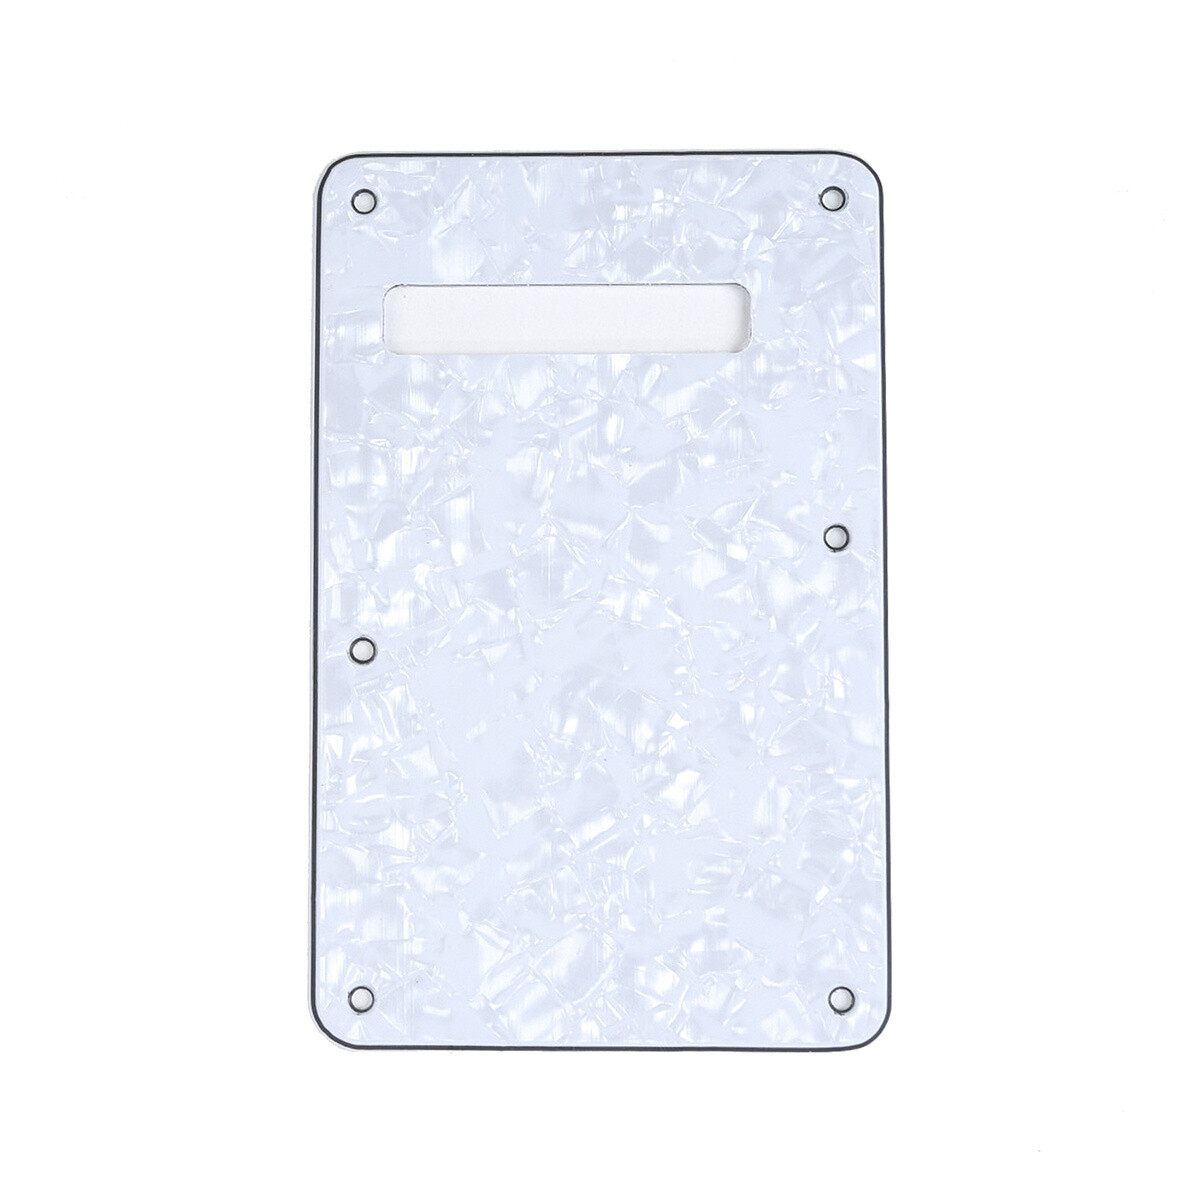 Brio Pearl White Modern Style Back Plate Tremolo Cover 4 ply - US/Mexican Fender®Strat® Fit